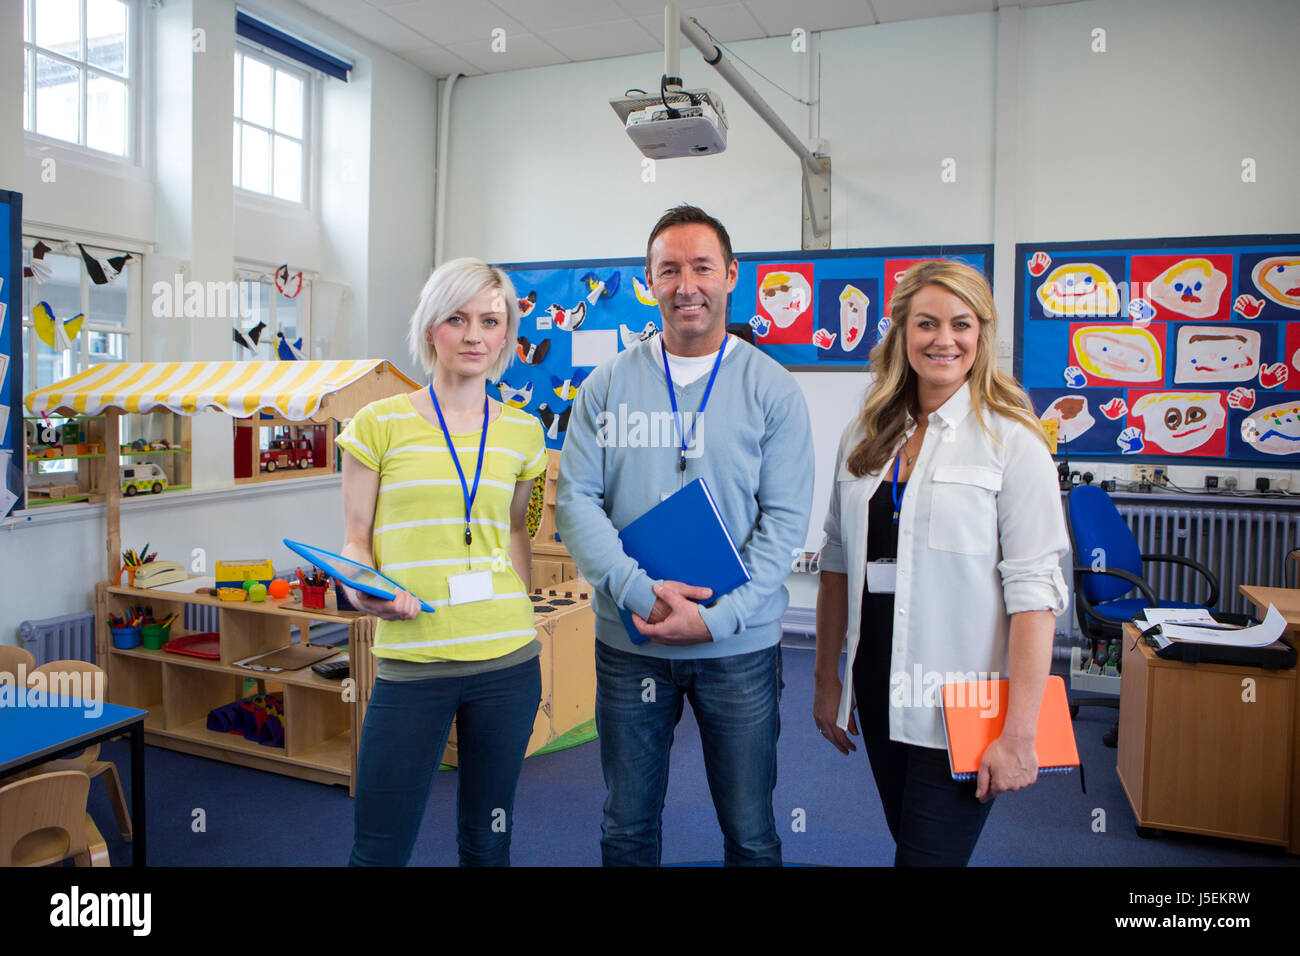 Three teachers standing in the classroom of a school building. They are holding school work and smiling at the camera. Stock Photo